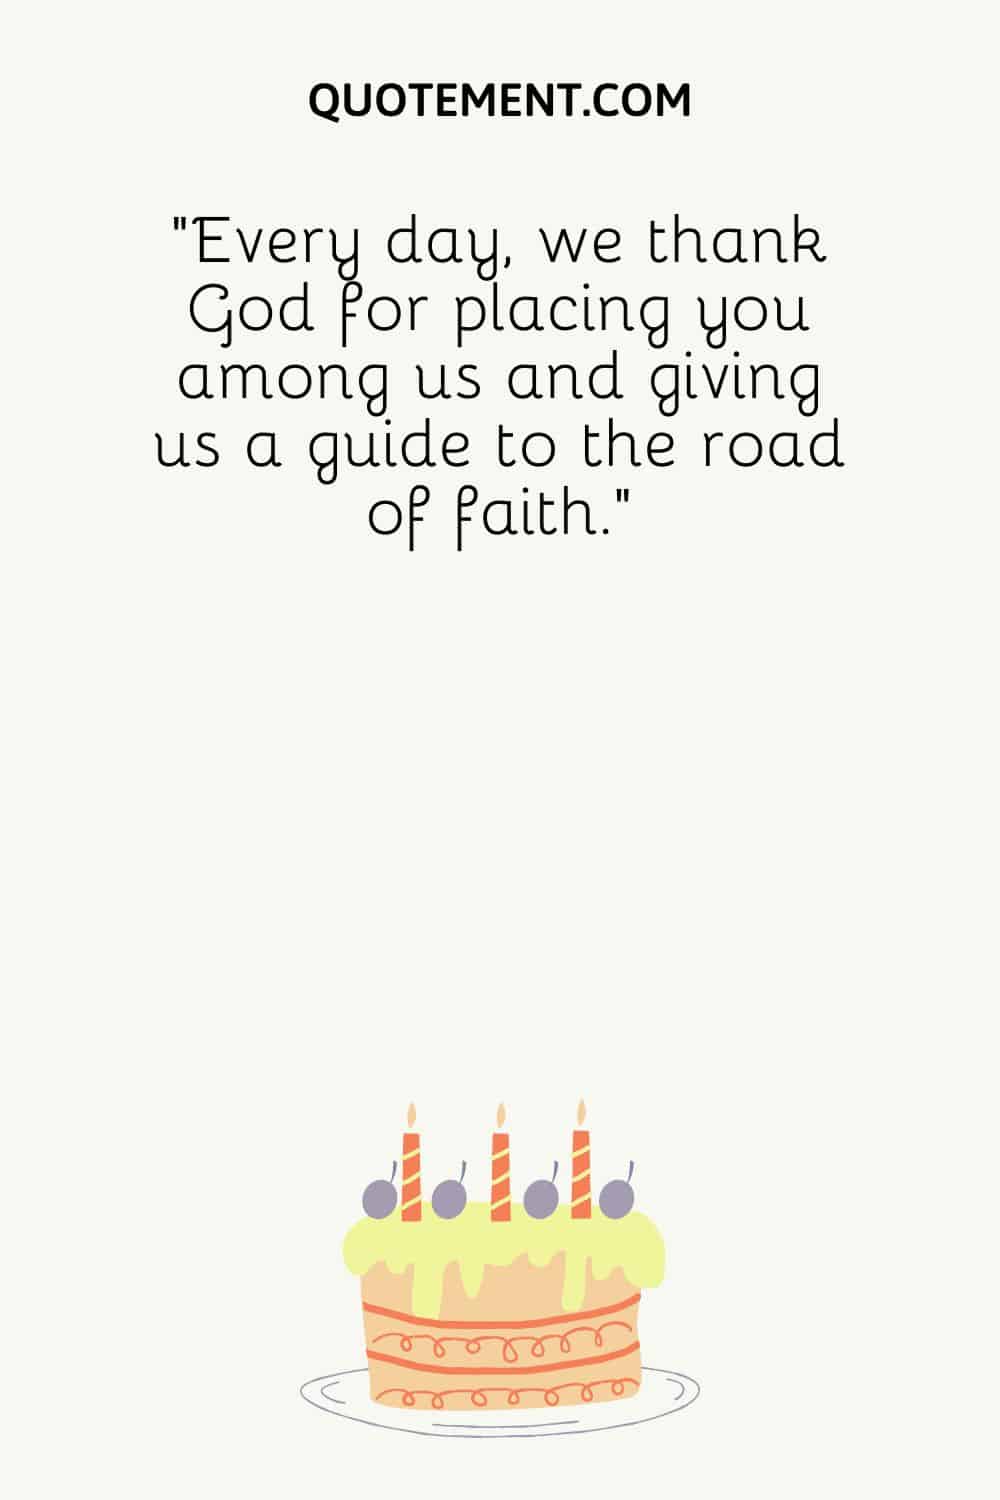 Every day, we thank God for placing you among us and giving us a guide to the road of faith